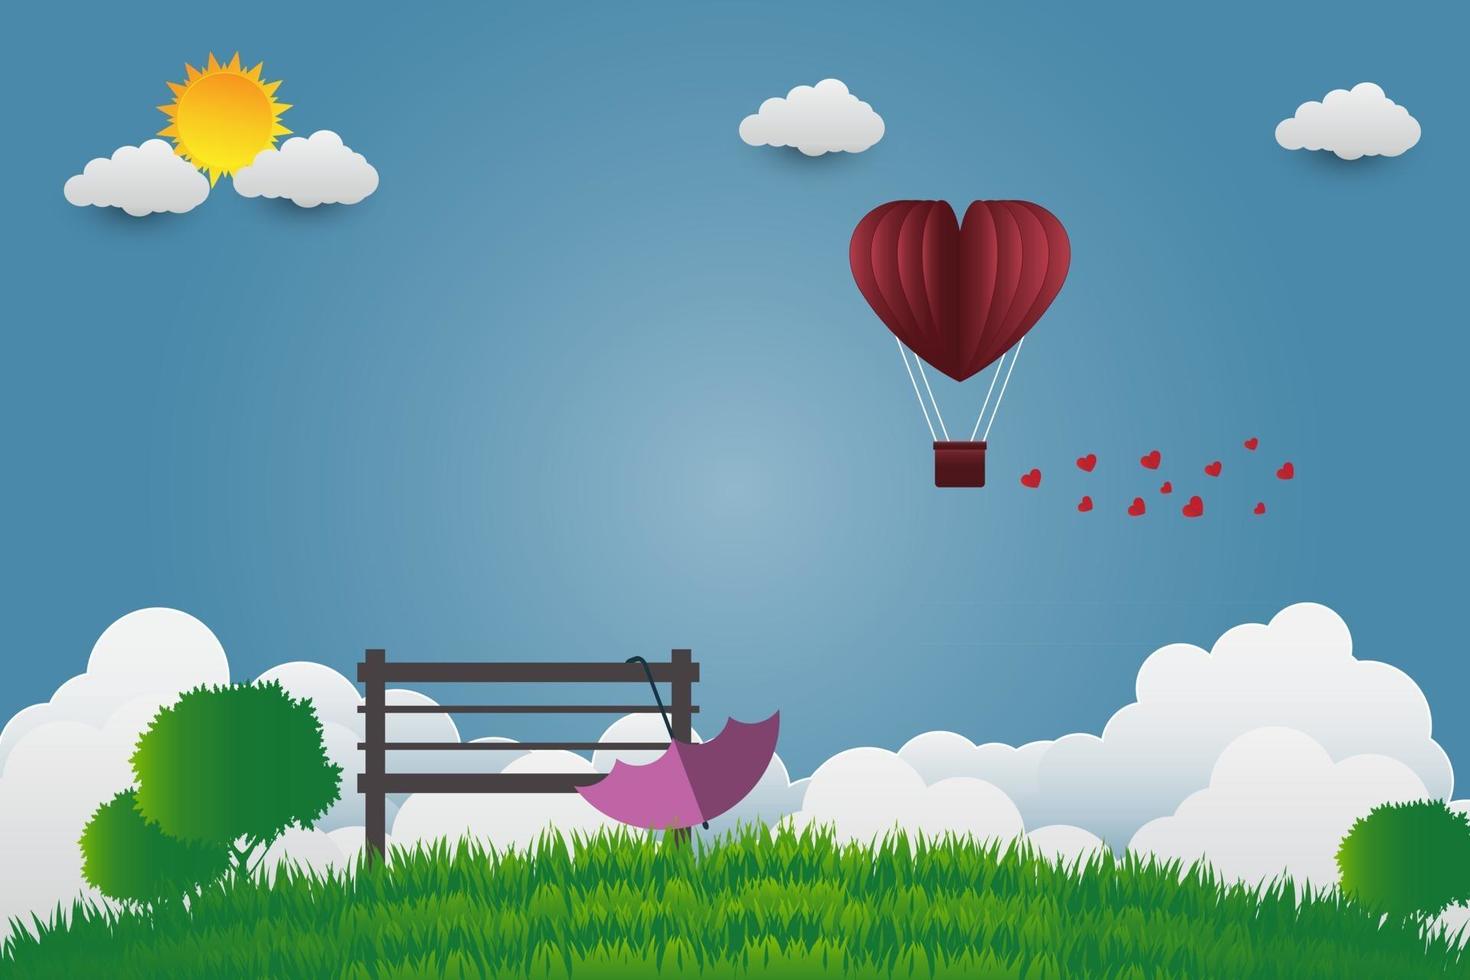 Valentine day umbrella with chair balloons in a heart shaped flying over grass view background paper art style vector